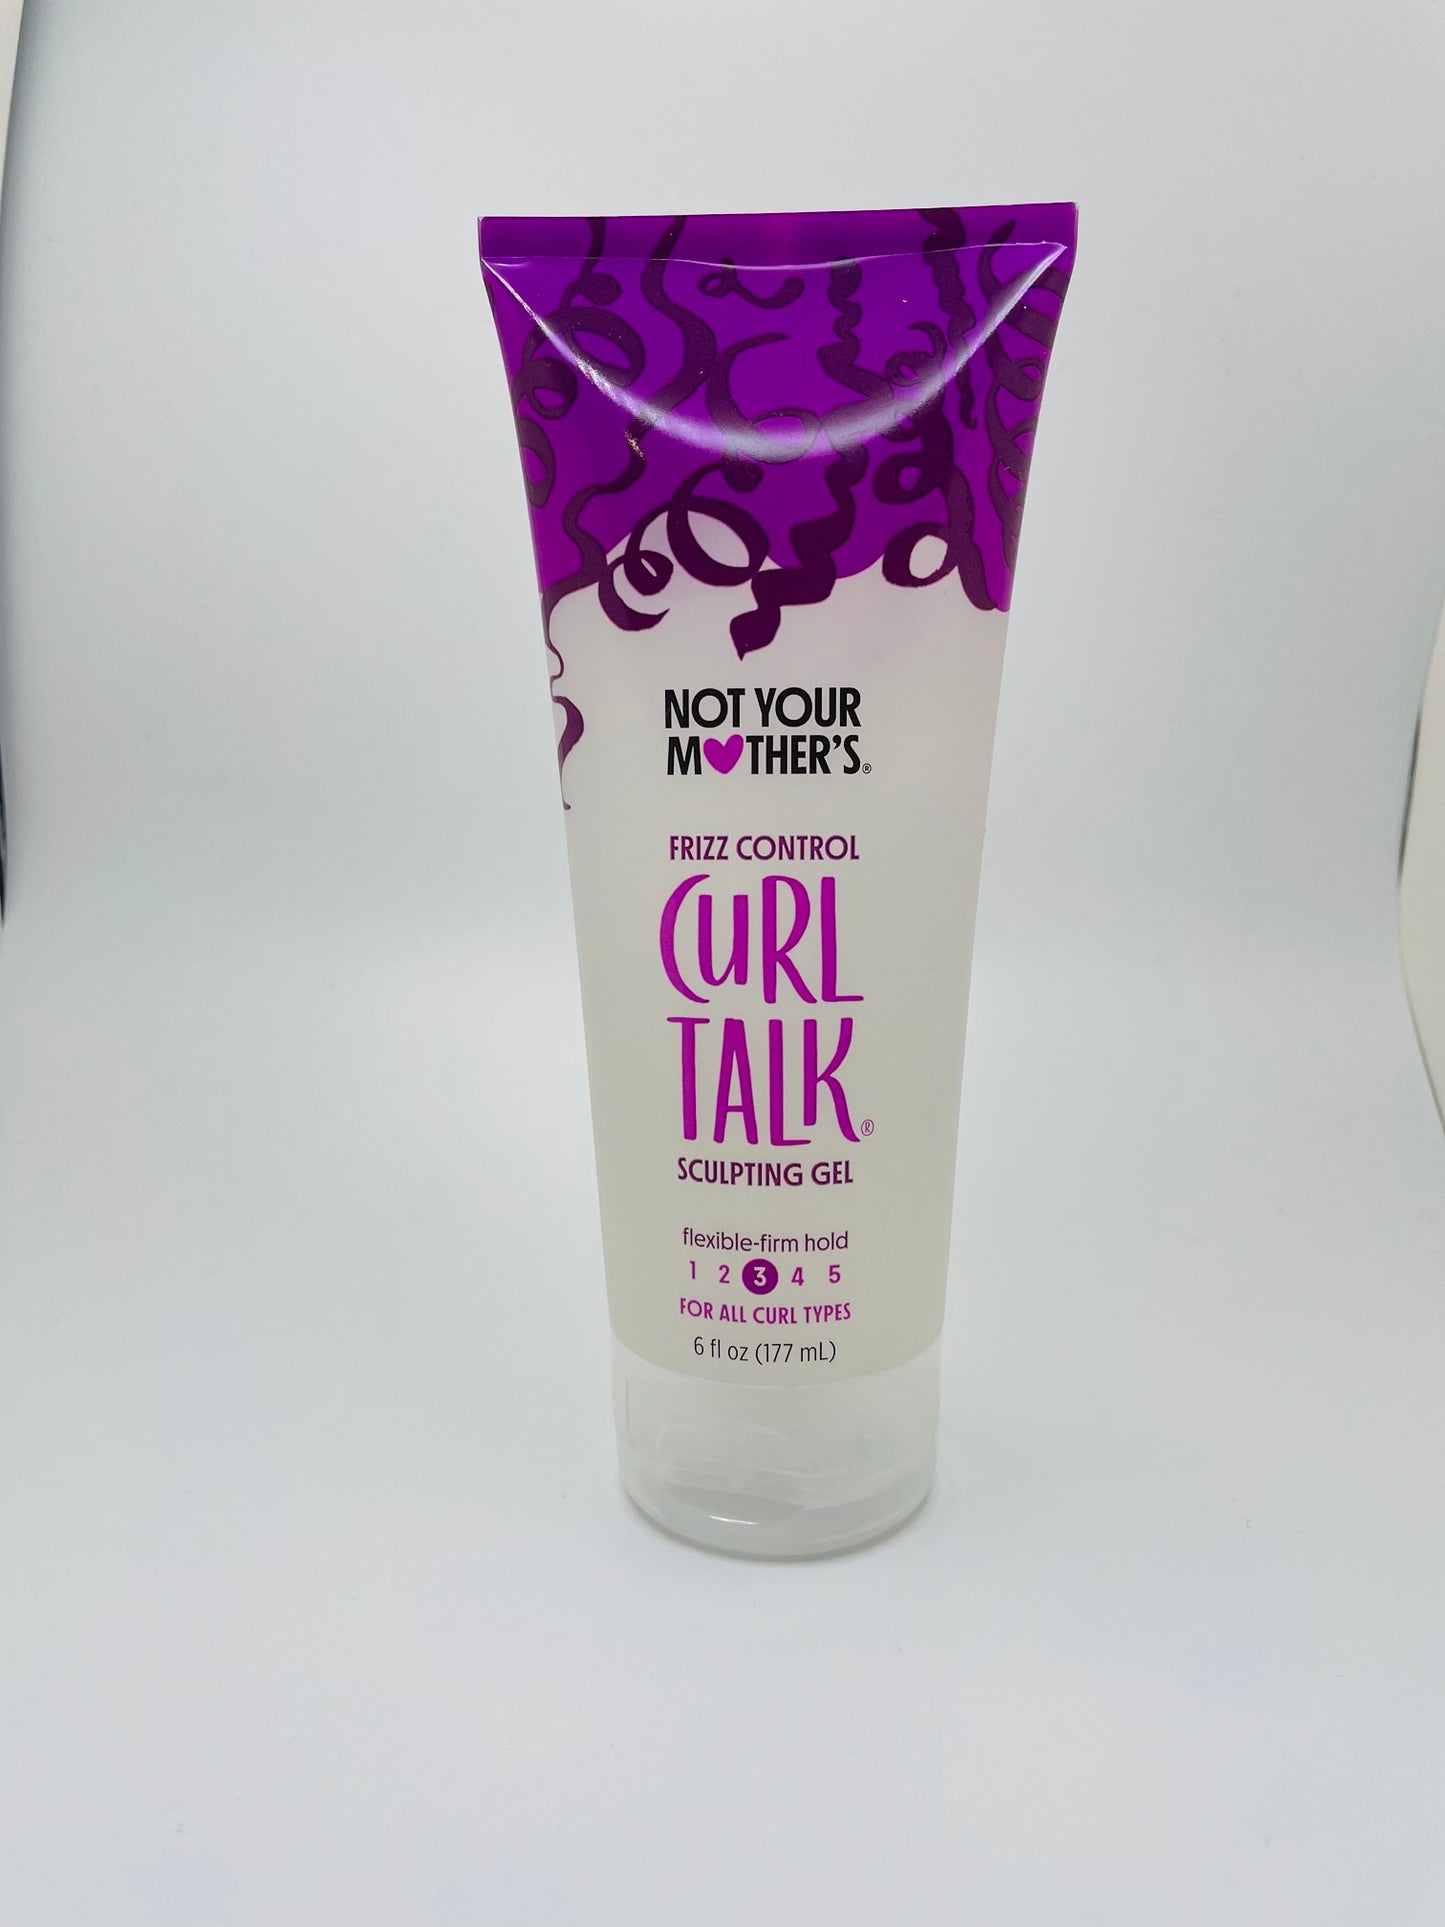 Not your mothers frizz control